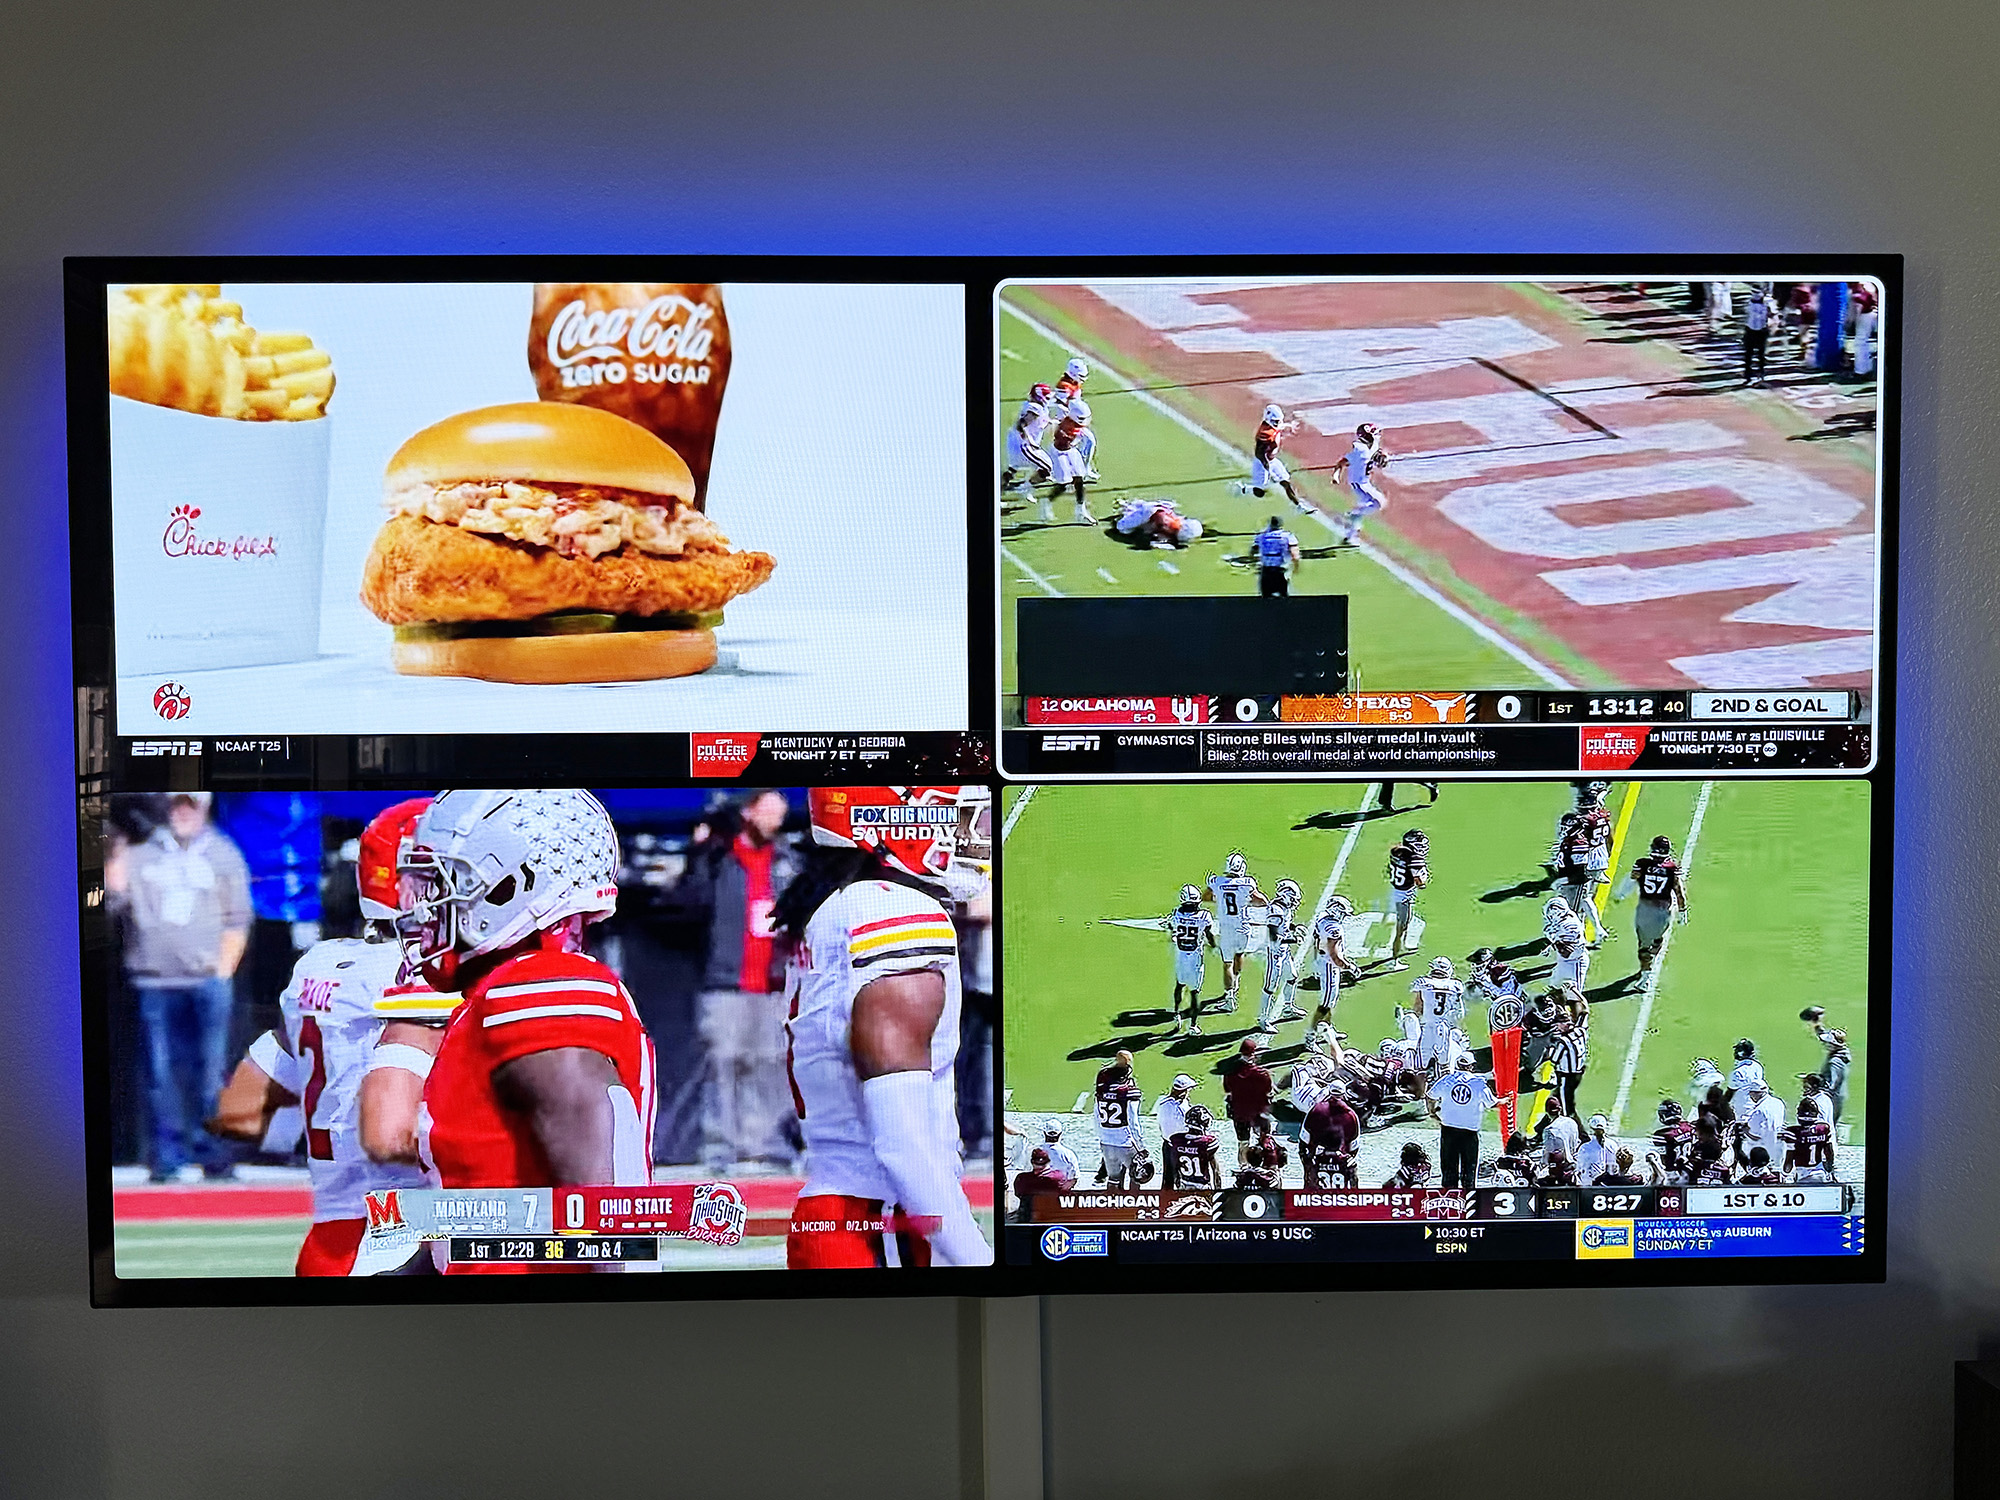 ESPN's Apple TV app now lets you watch four games at once